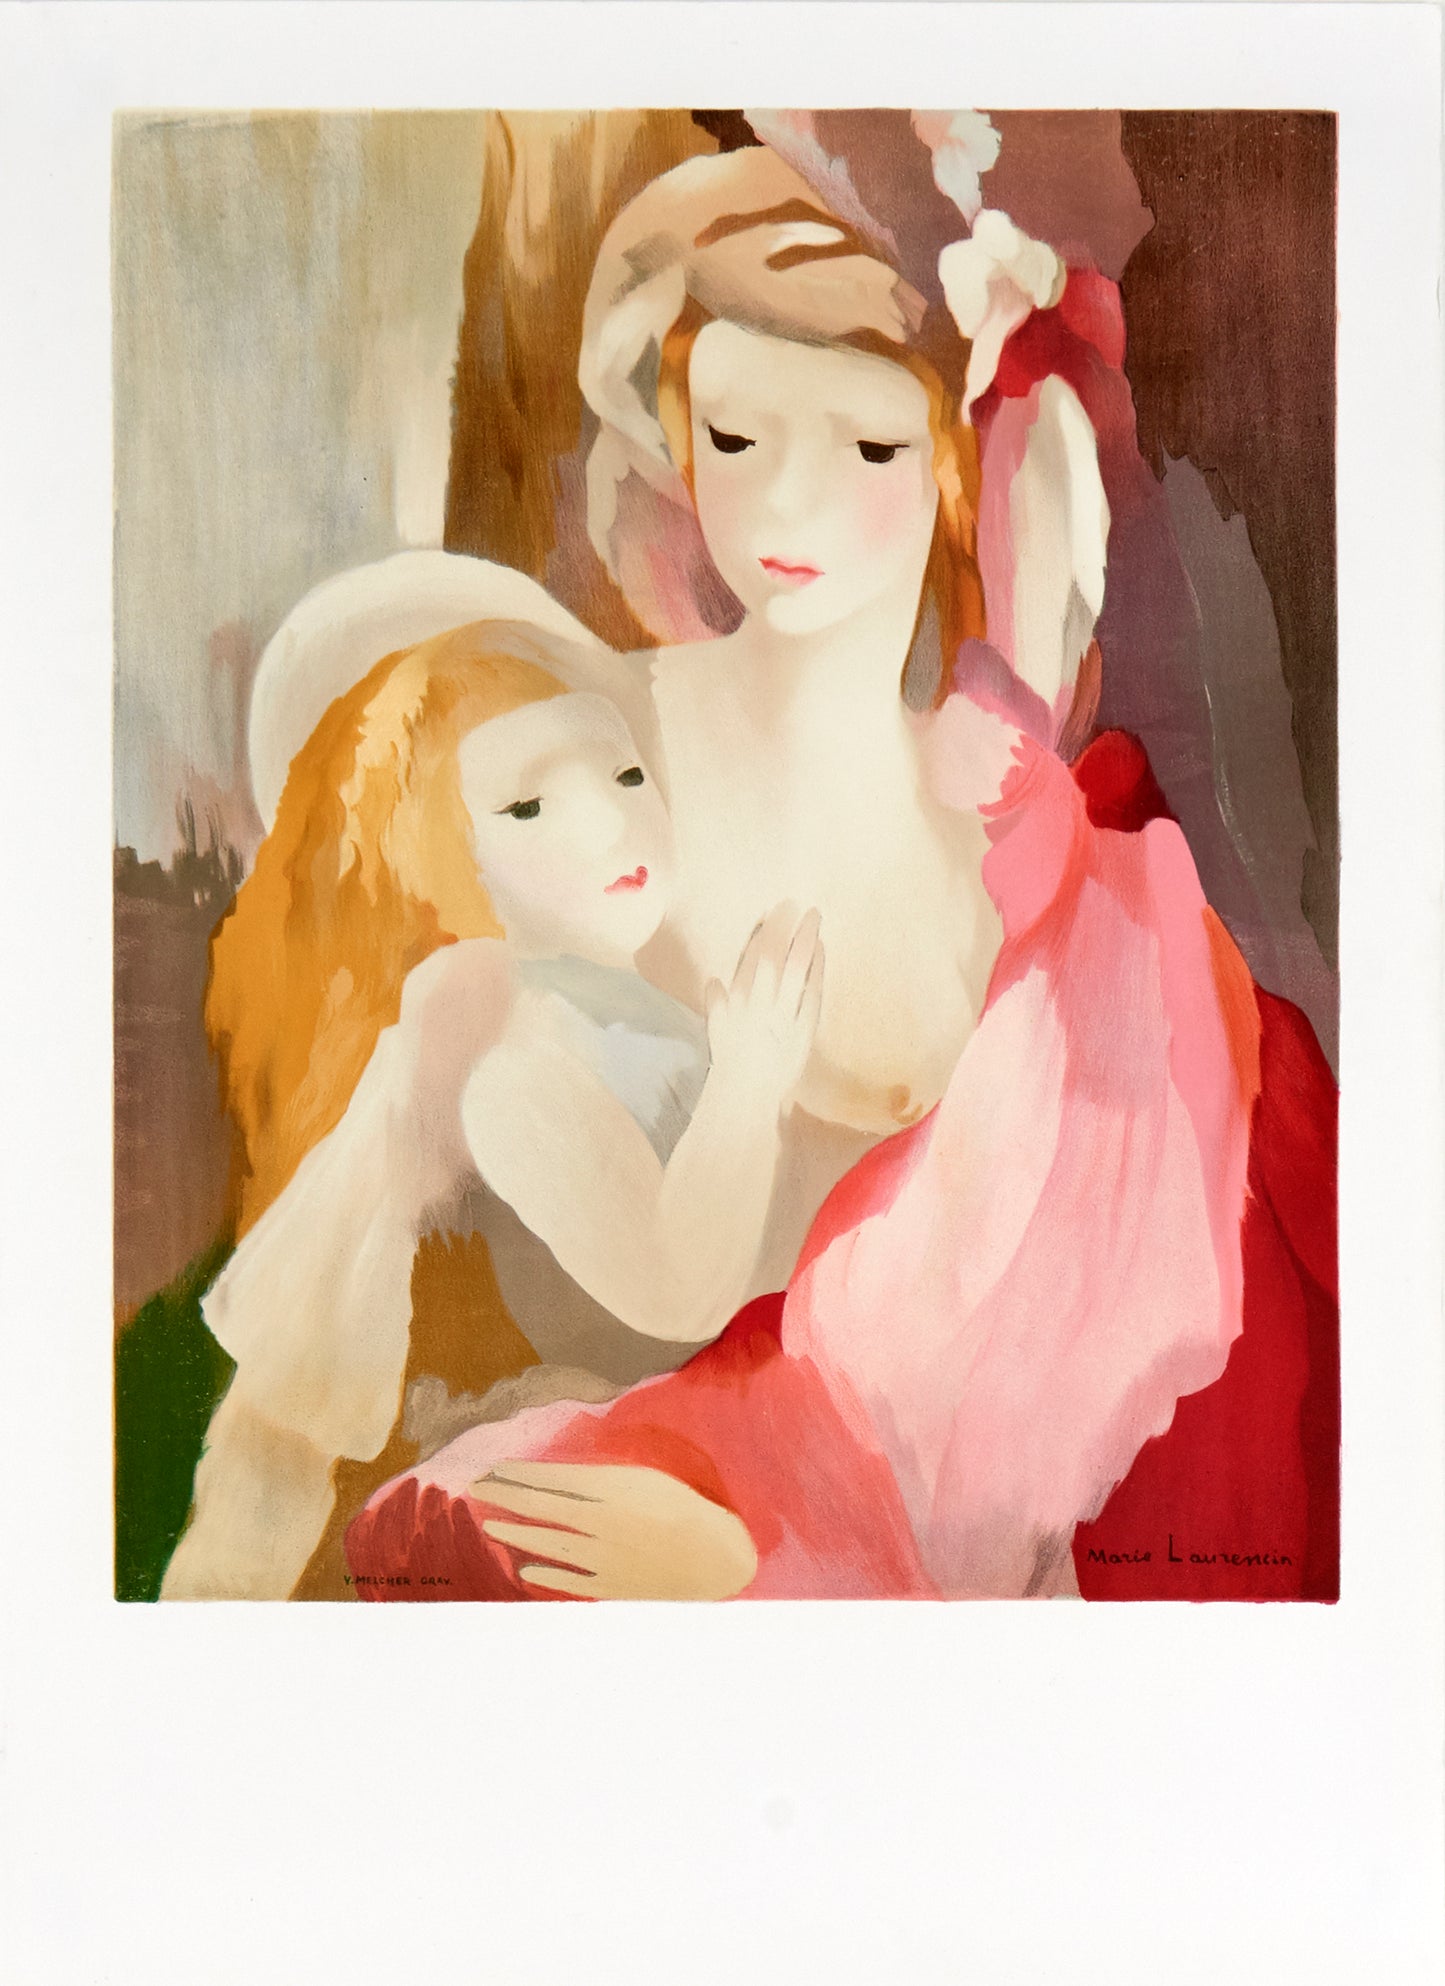 Mother and Child (after) Marie Laurencin, 1986 - Mourlot Editions - Fine_Art - Poster - Lithograph - Wall Art - Vintage - Prints - Original